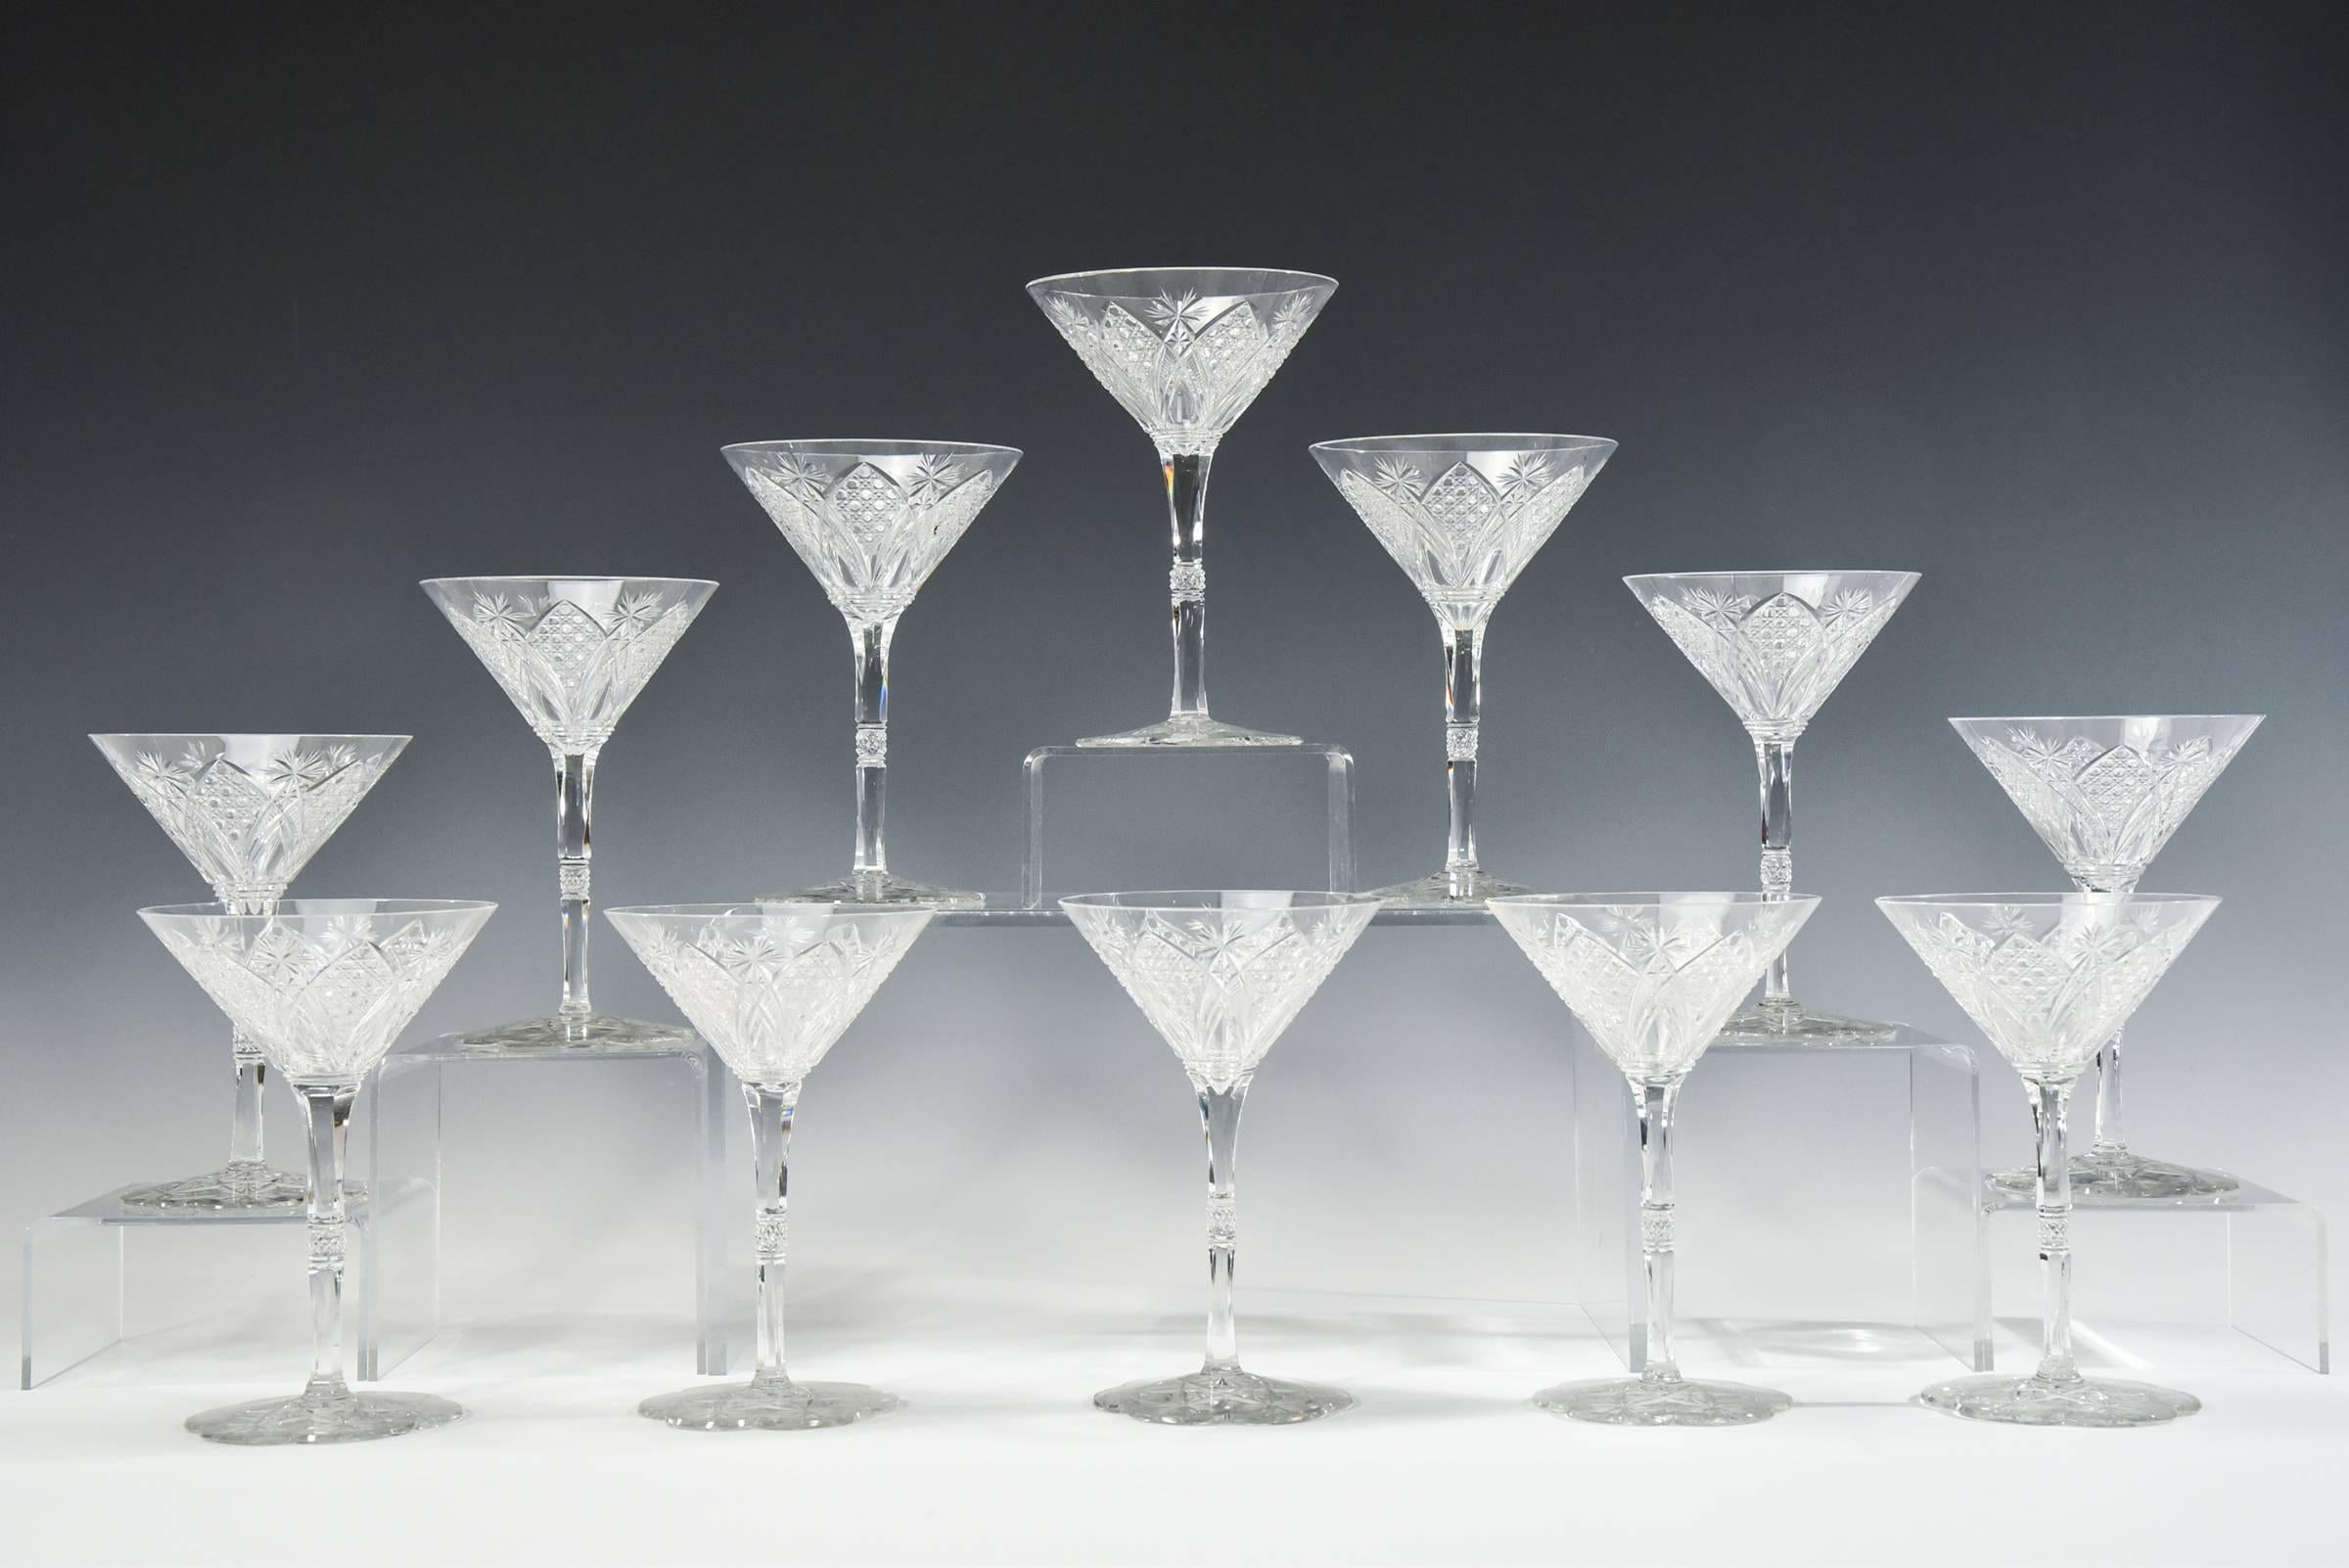 This amazing and rare Baccarat Elbeuf service was first introduced in 1908 and presented at the International Exhibition in Nancy, France in 1909. Specially ordered in 1920 by the Maharaja of Baroda, these are truly fit for a King!
This set of 12